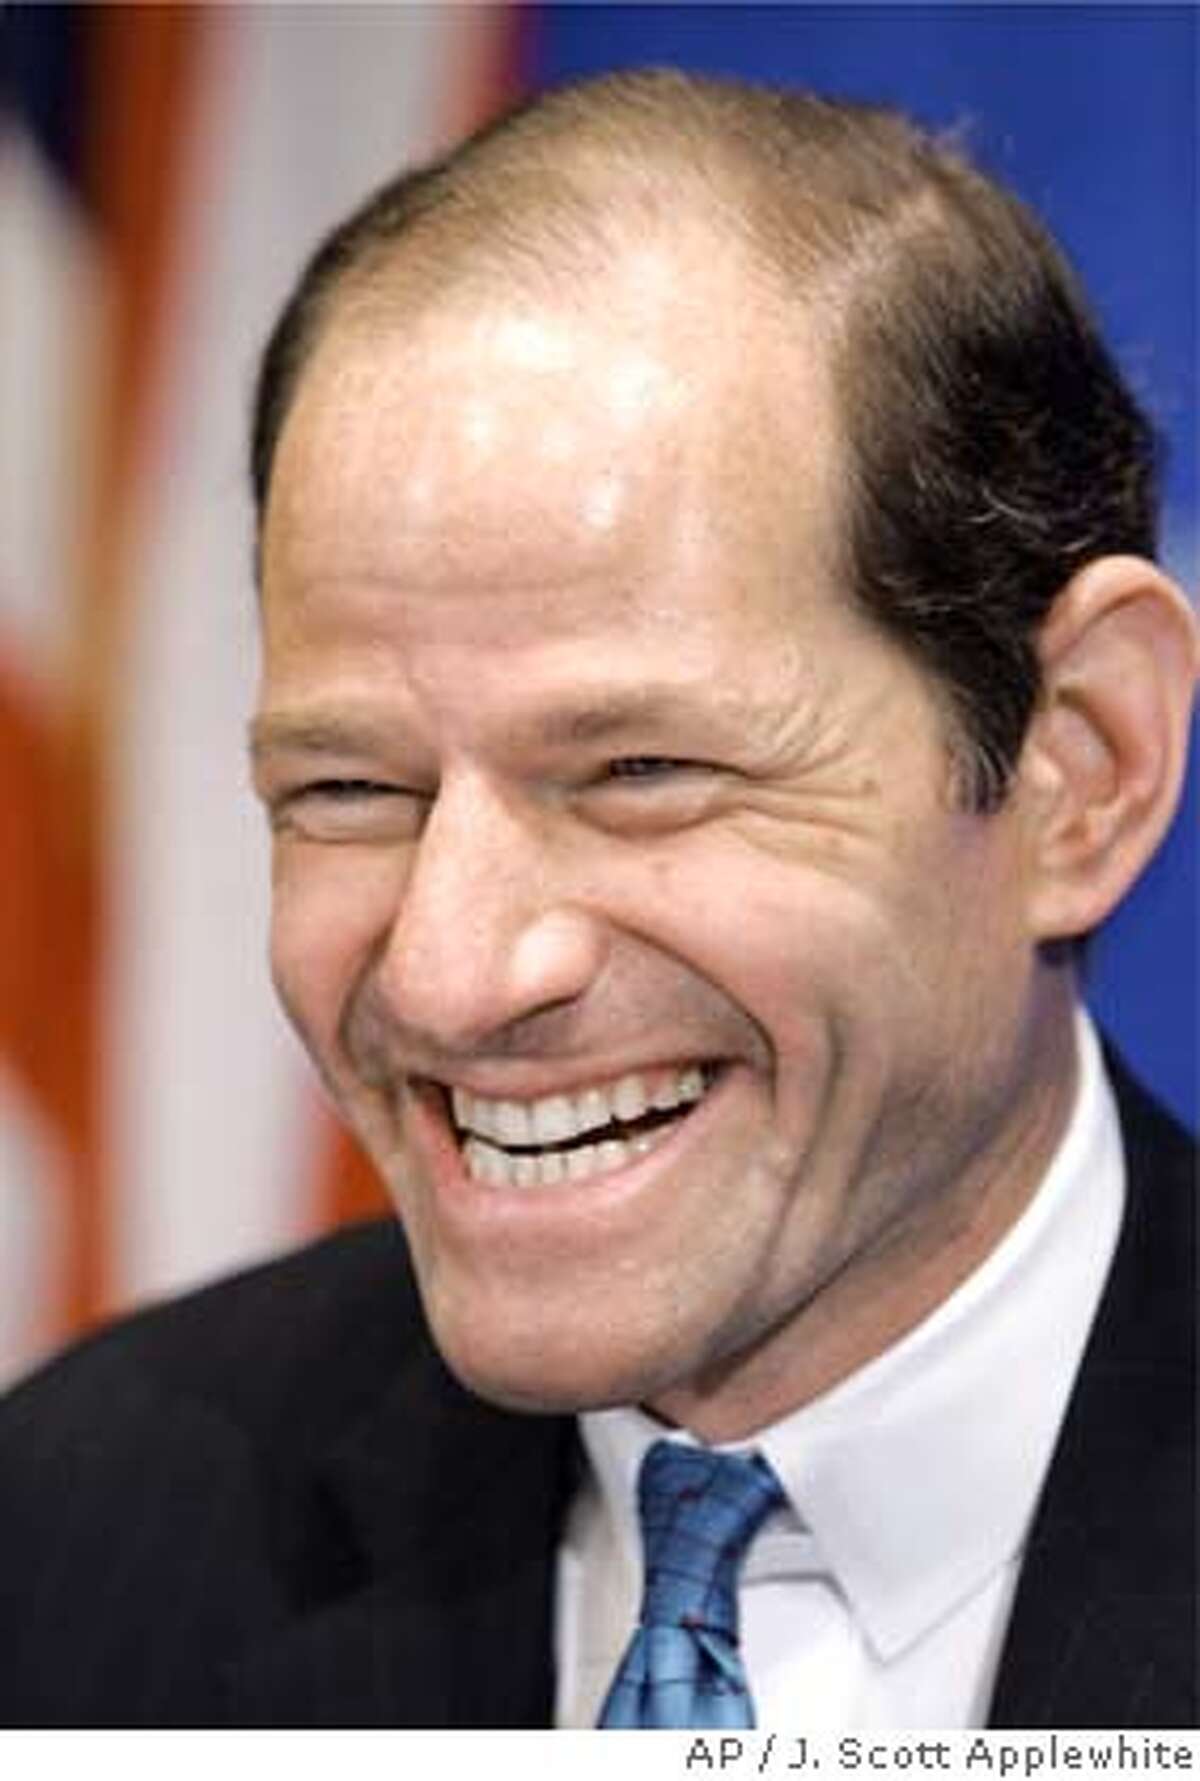 New York Attorney General Eliot Spitzer smiles before speaking at a sold-out luncheon at the National Press Club in Washington, Monday, Jan. 31, 2005. Earlier Monday, the nation's largest insurance brokerage, Marsh & McLennan Companies Inc., agreed to pay $850 million in restitution to end Spitzer's investigation into bid rigging and price fixing. (AP Photo/J. Scott Applewhite)